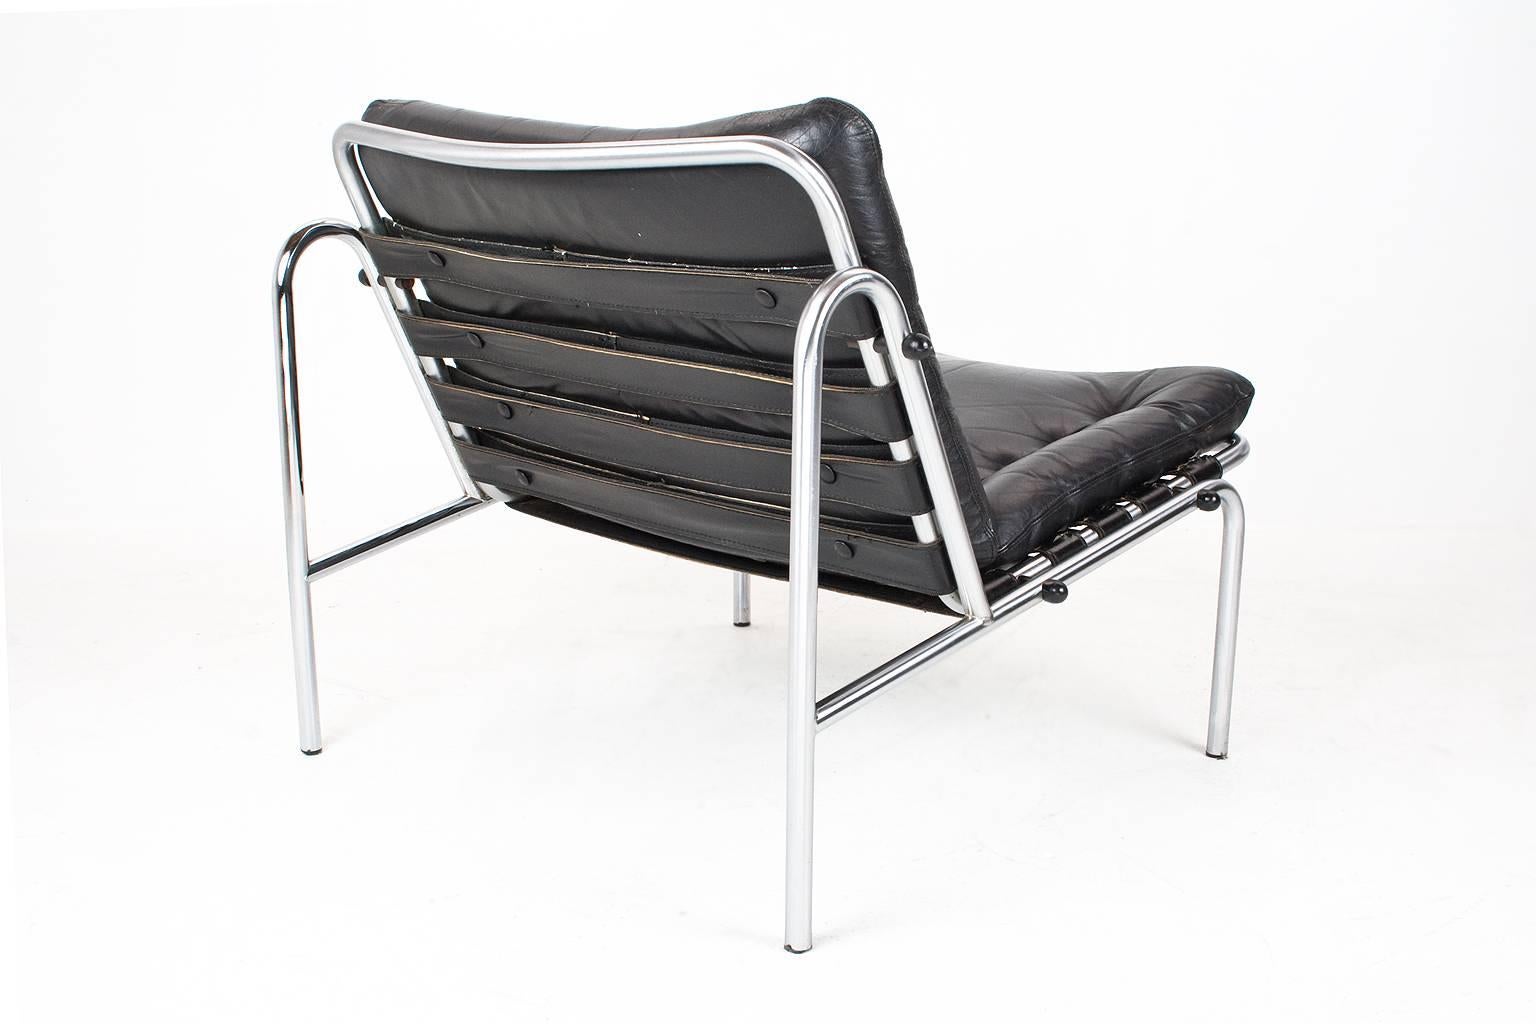 Original black leather Martin Visser lounge chair, model Kyoto (SZ07), designed in 1969 as part of the Osaka series for the world fair in Japan (Osaka); and part of the Spectrum collection from 1969-1974, midcentury Dutch desgin. We have 2 in stock.